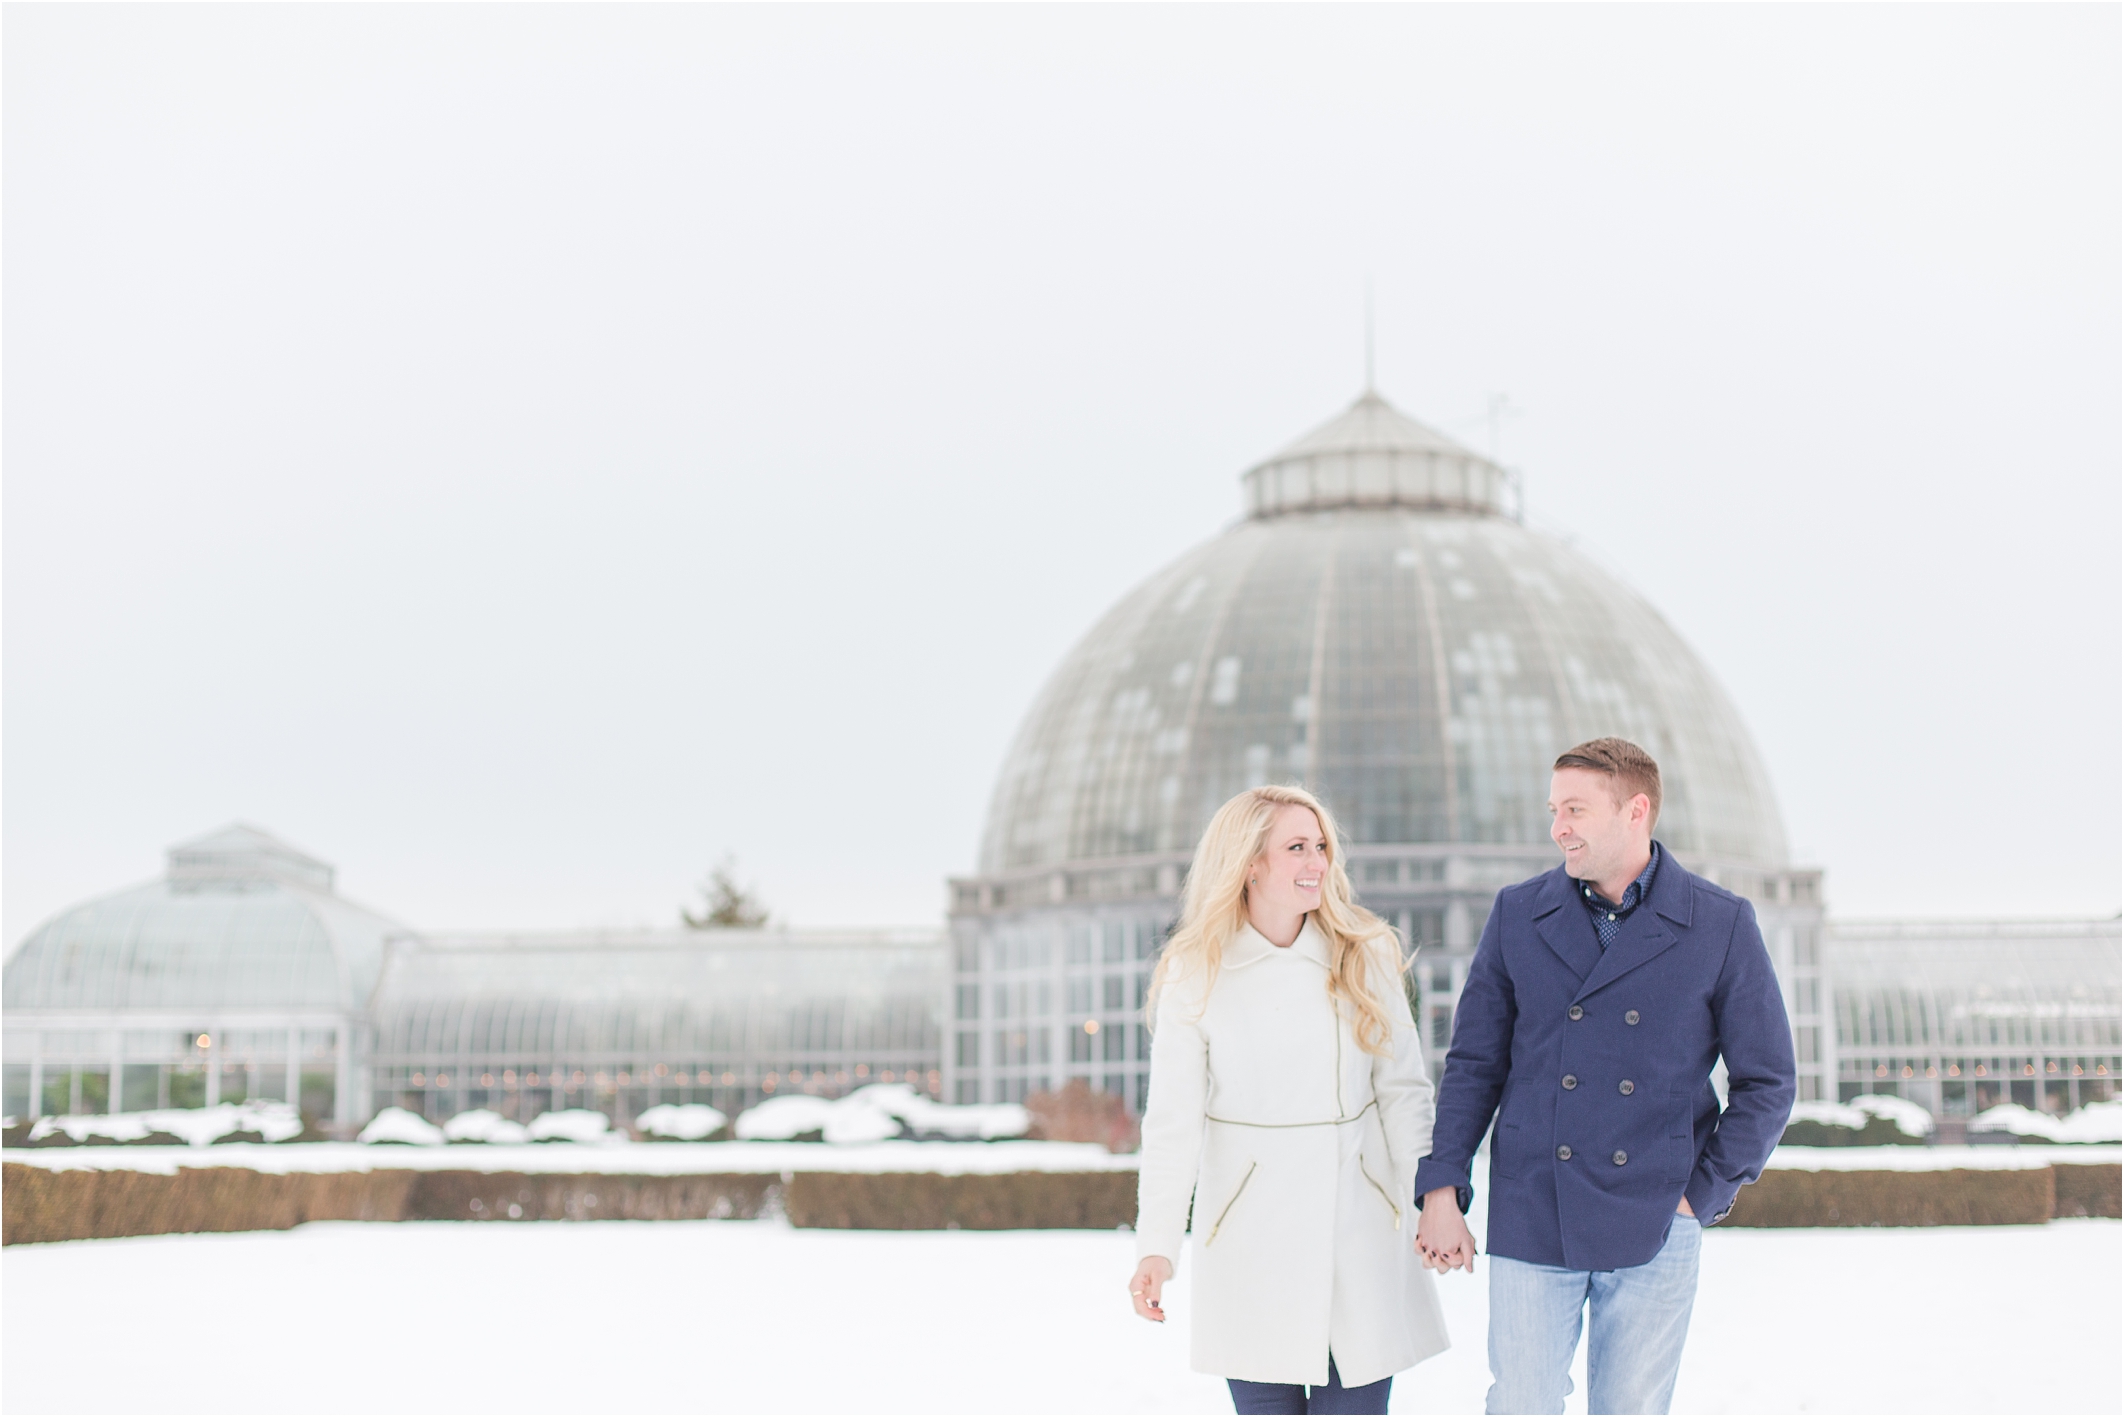 elegant-classic-belle-isle-conservatory-engagement-photos-in-detroit-mi-by-courtney-carolyn-photography_0032.jpg